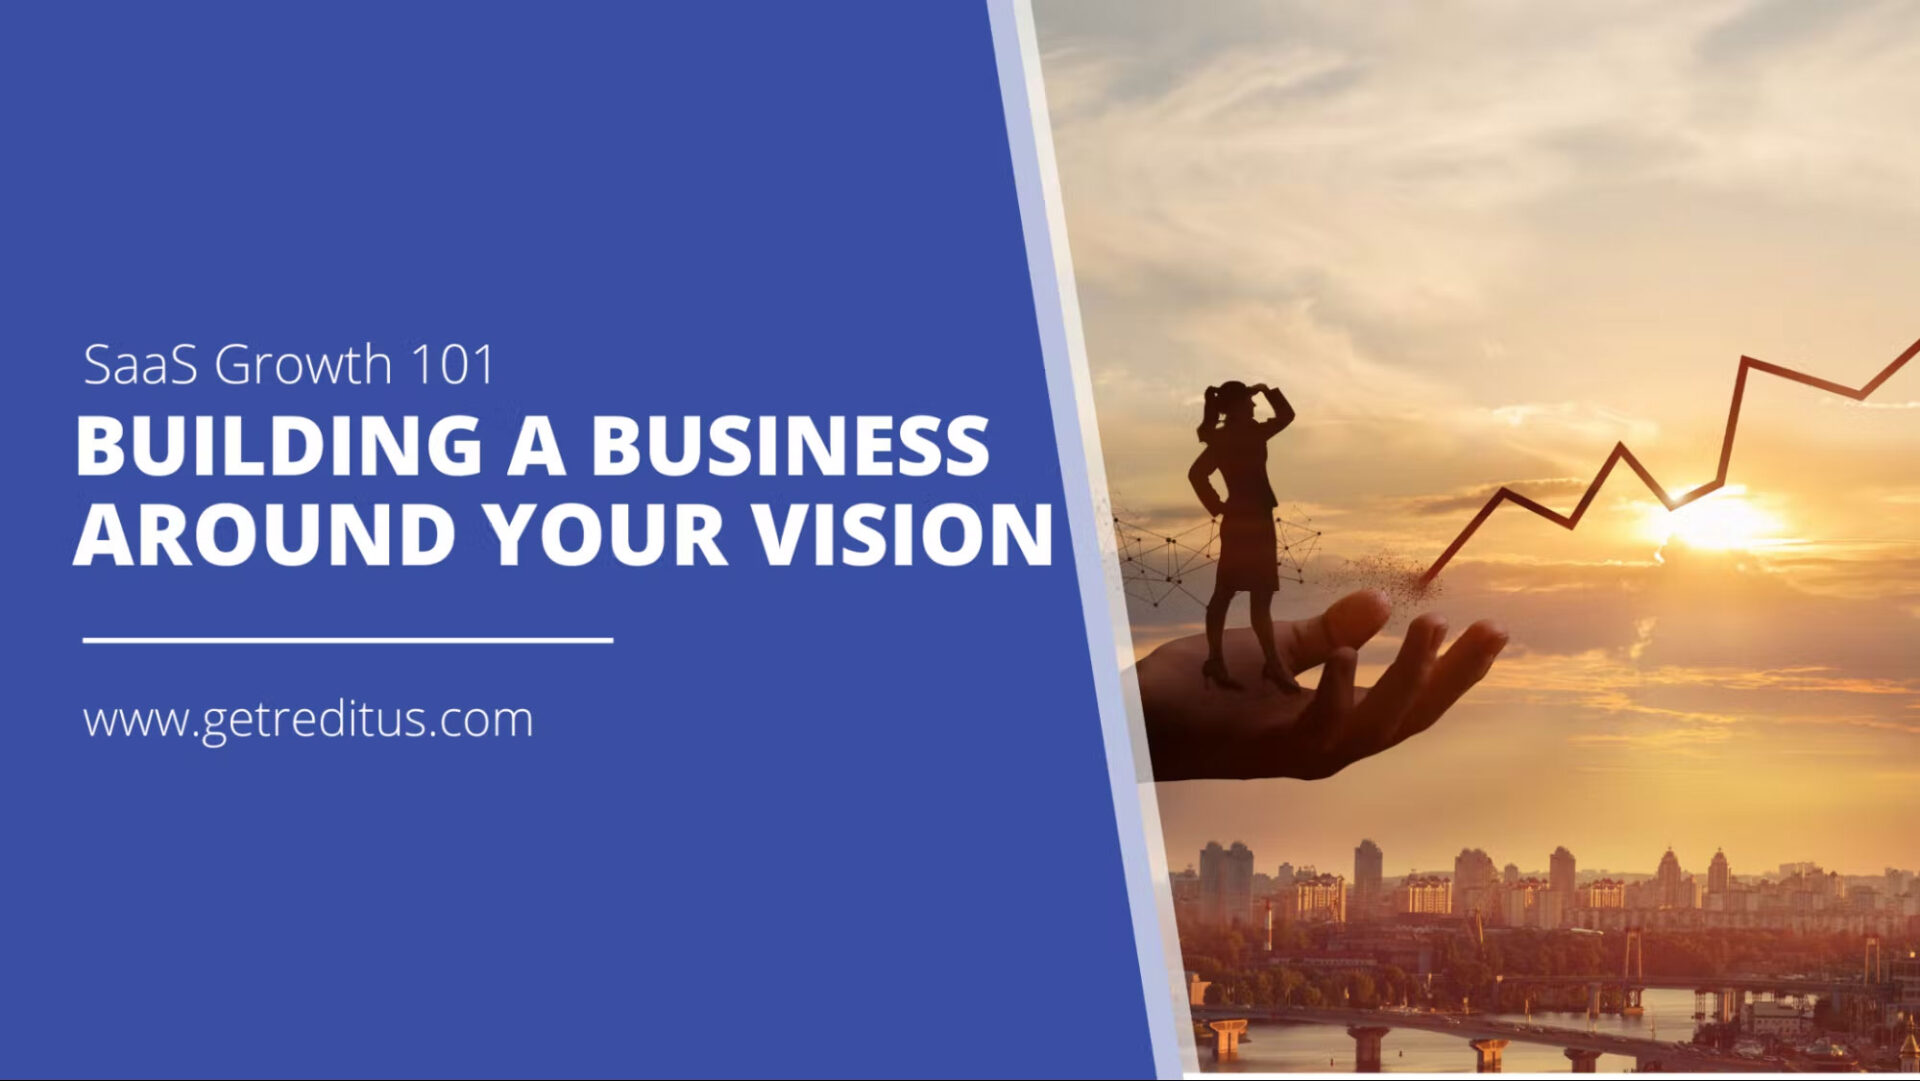 SaaS Growth 101: Build a Business Around Your Vision